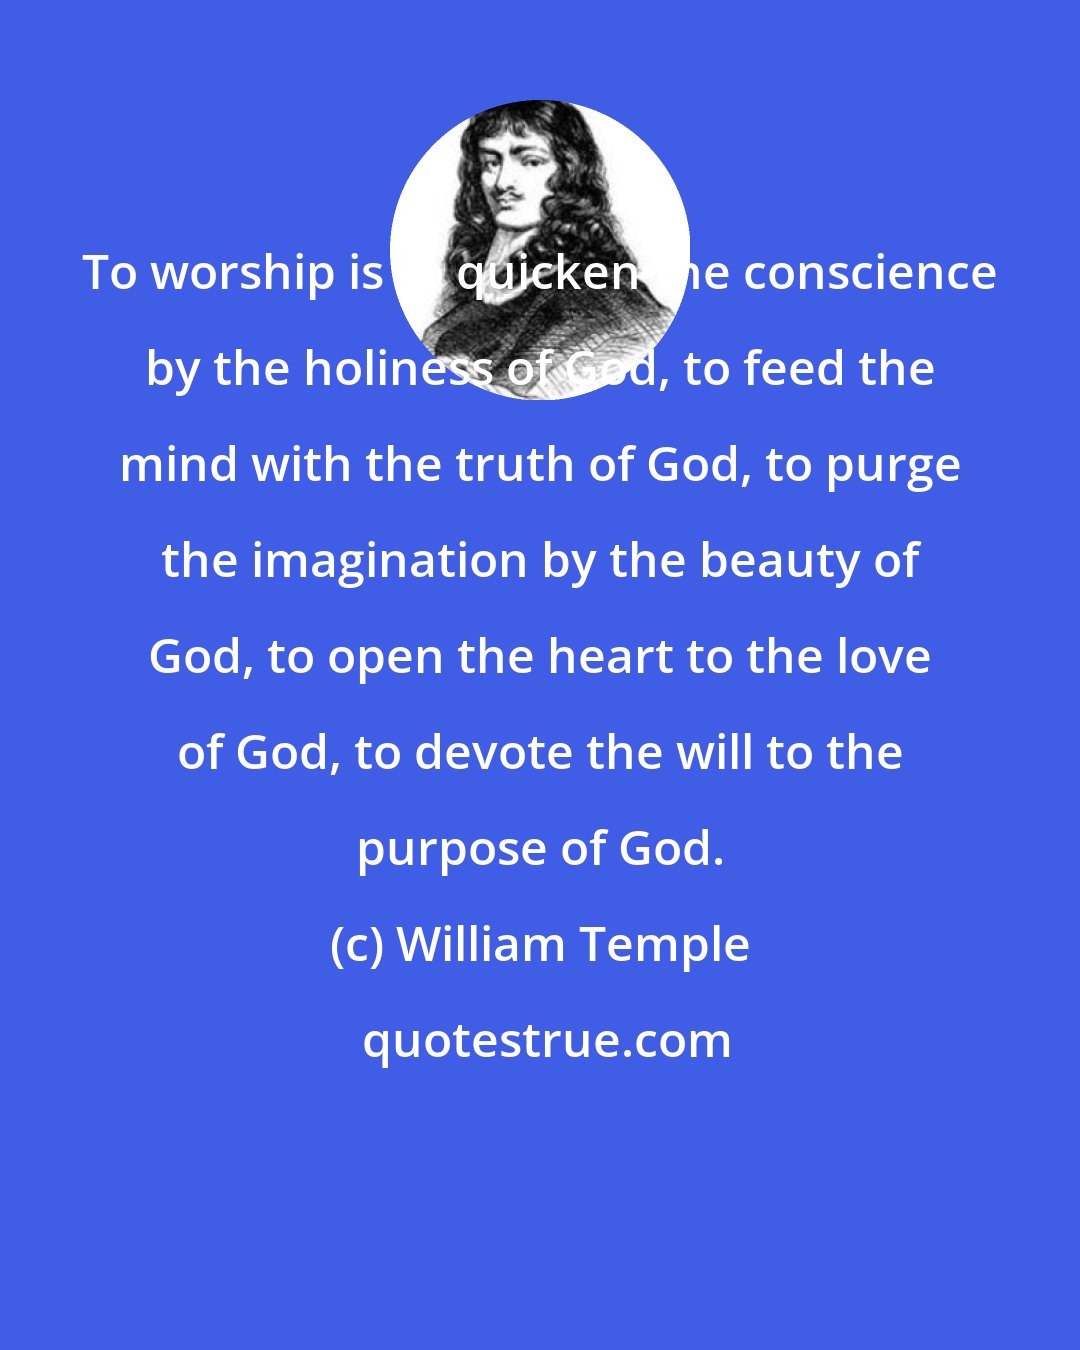 William Temple: To worship is to quicken the conscience by the holiness of God, to feed the mind with the truth of God, to purge the imagination by the beauty of God, to open the heart to the love of God, to devote the will to the purpose of God.